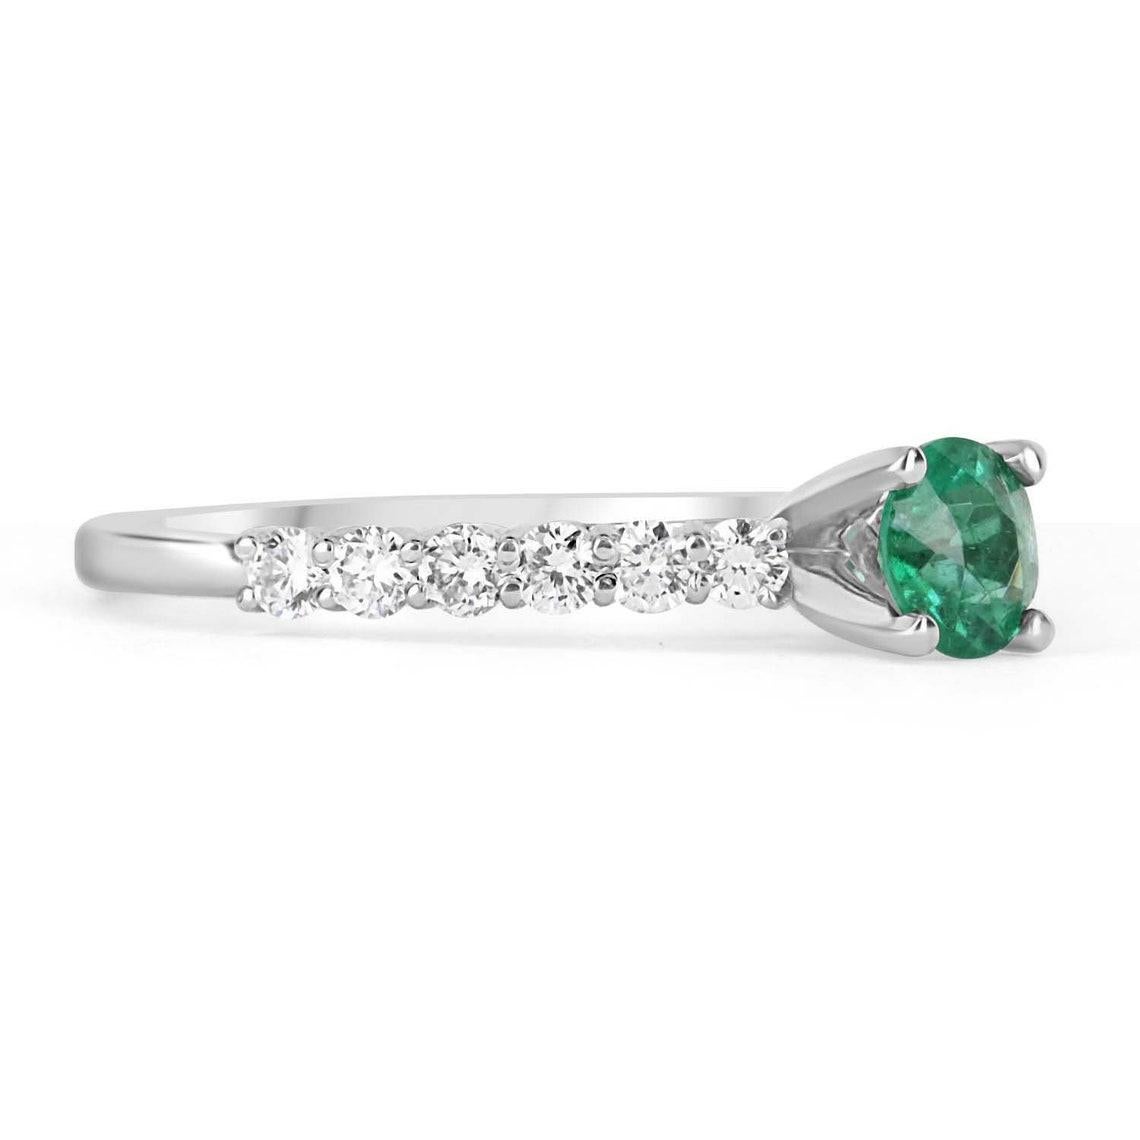 Displayed is a classic 1.15tcw natural emerald & diamond solitaire with accents engagement ring in 14K white gold. This gorgeous solitaire ring carries a full 0.55-carat emerald in a four-prong setting. Fully faceted, this gemstone showcases